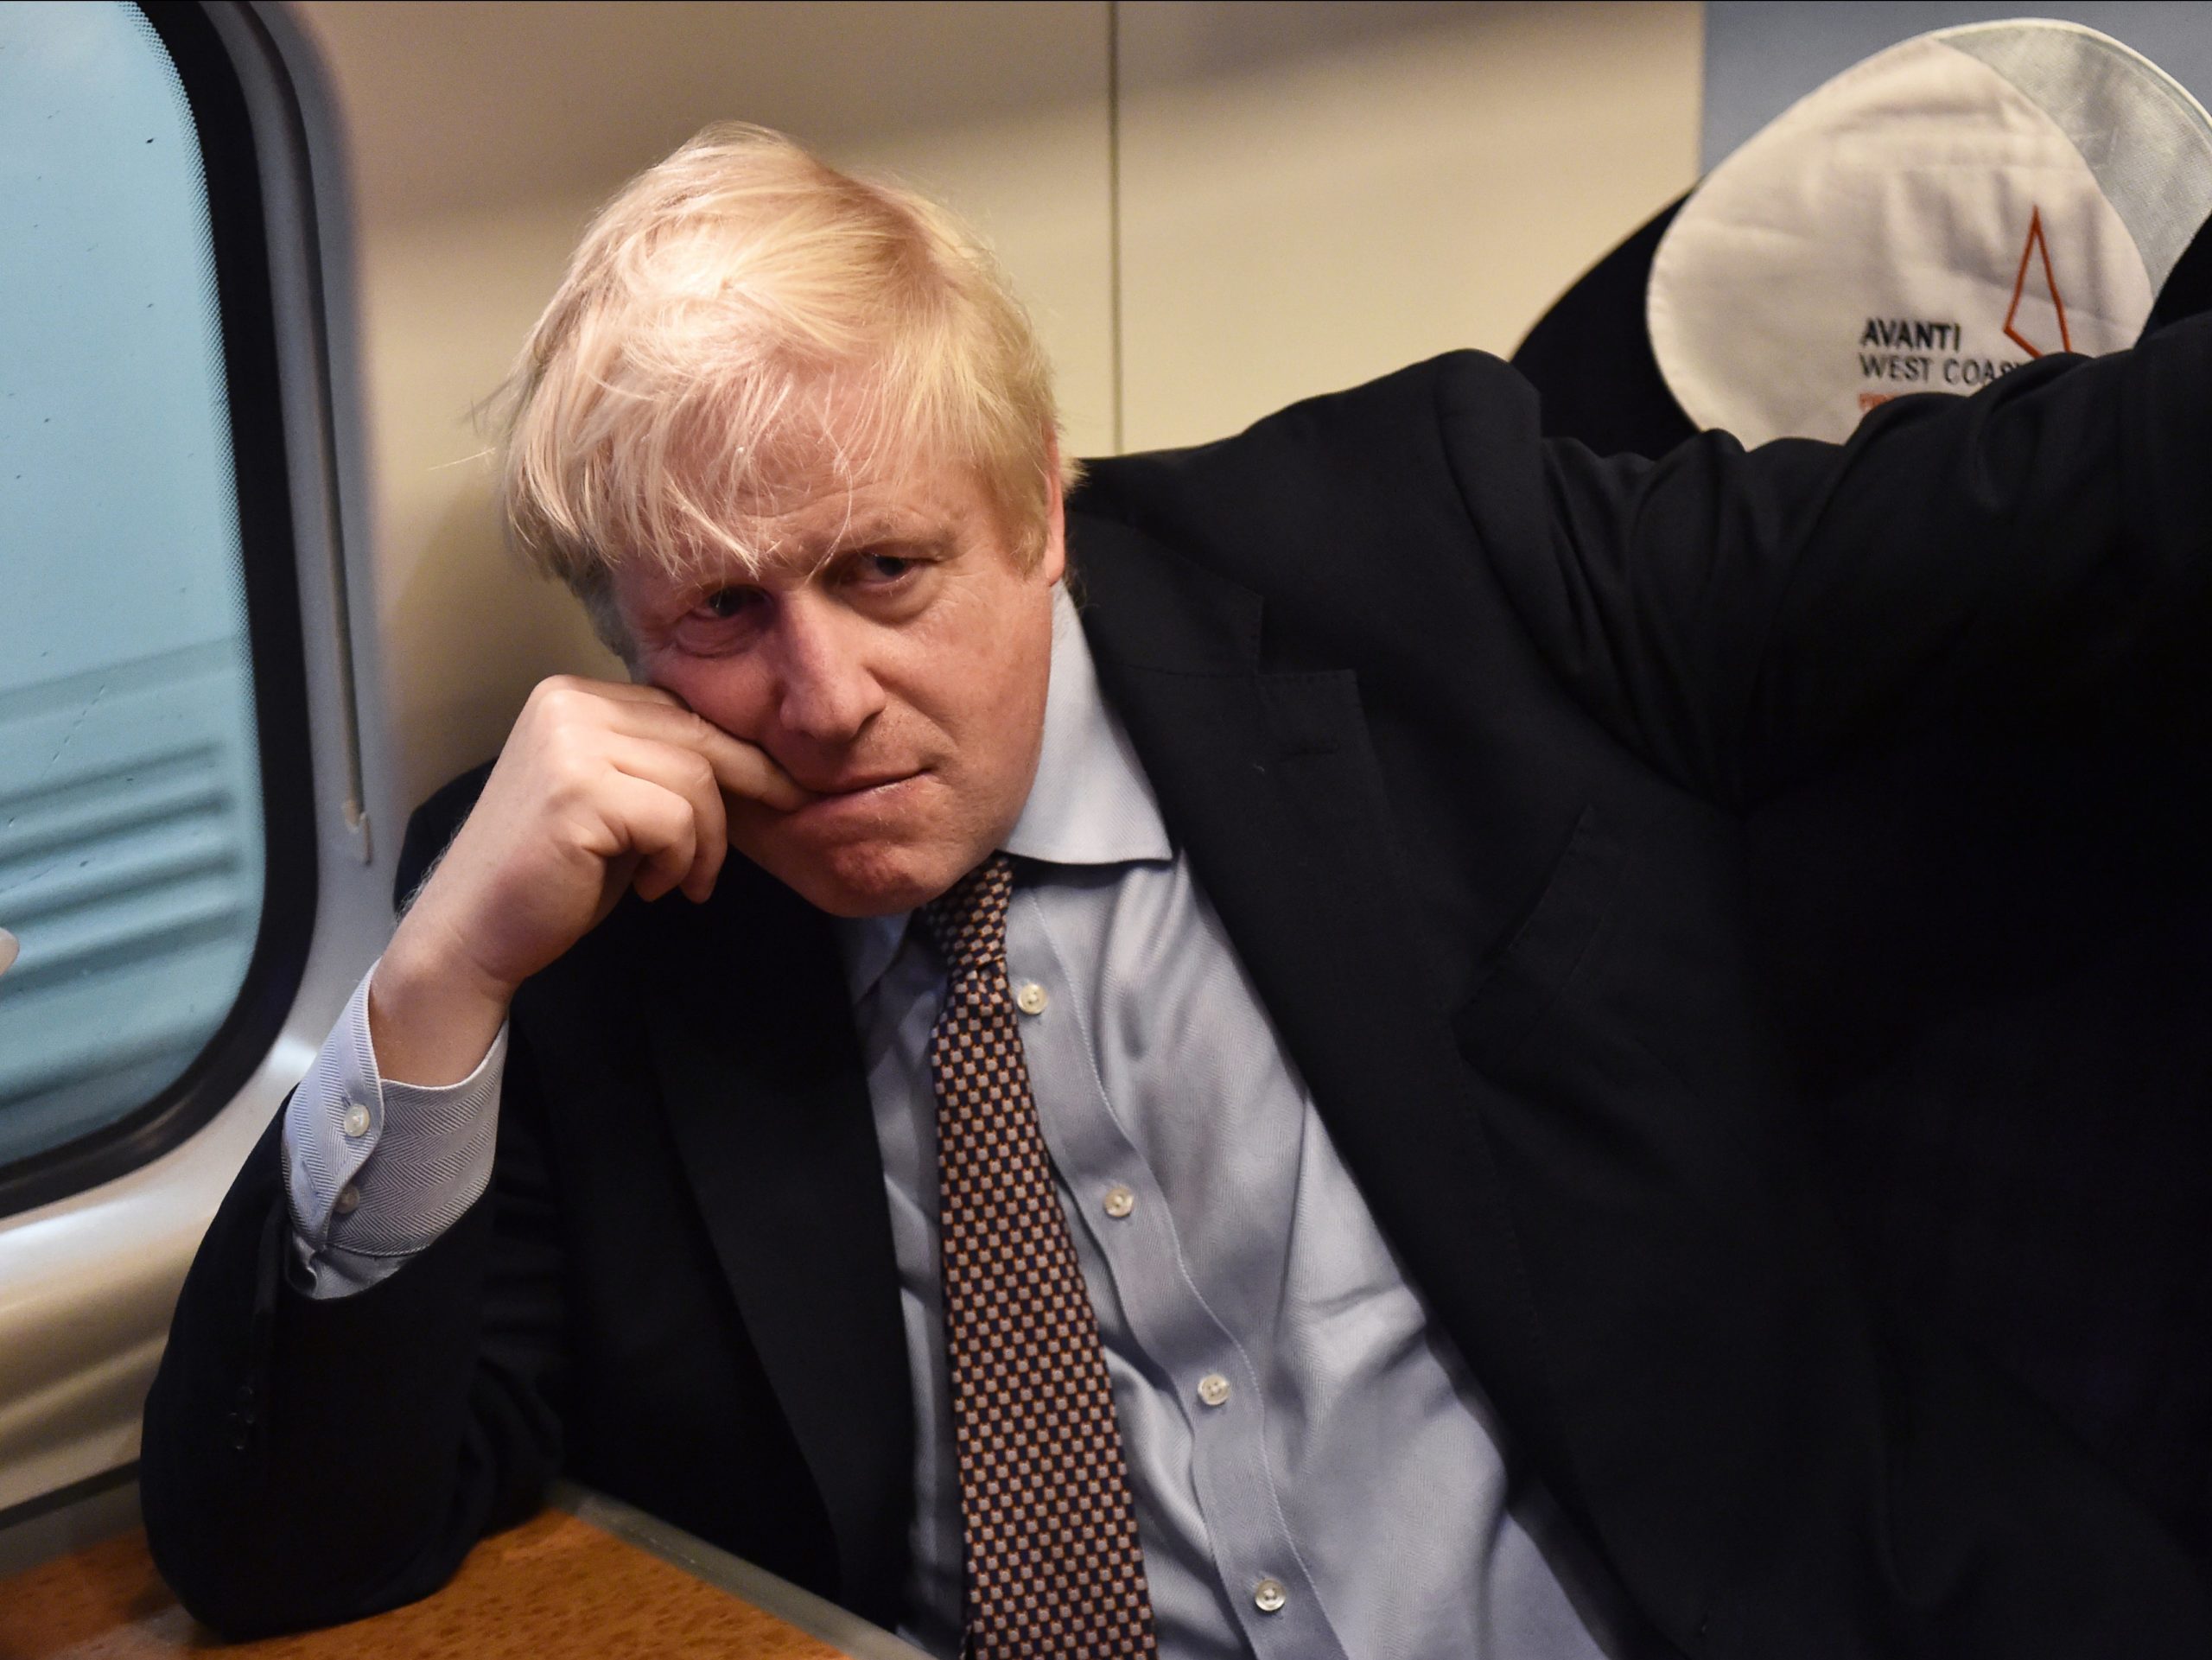 Boris was spotted ‘without mask’After apologizing for the visit to the hospital with a maskless face, we boarded train